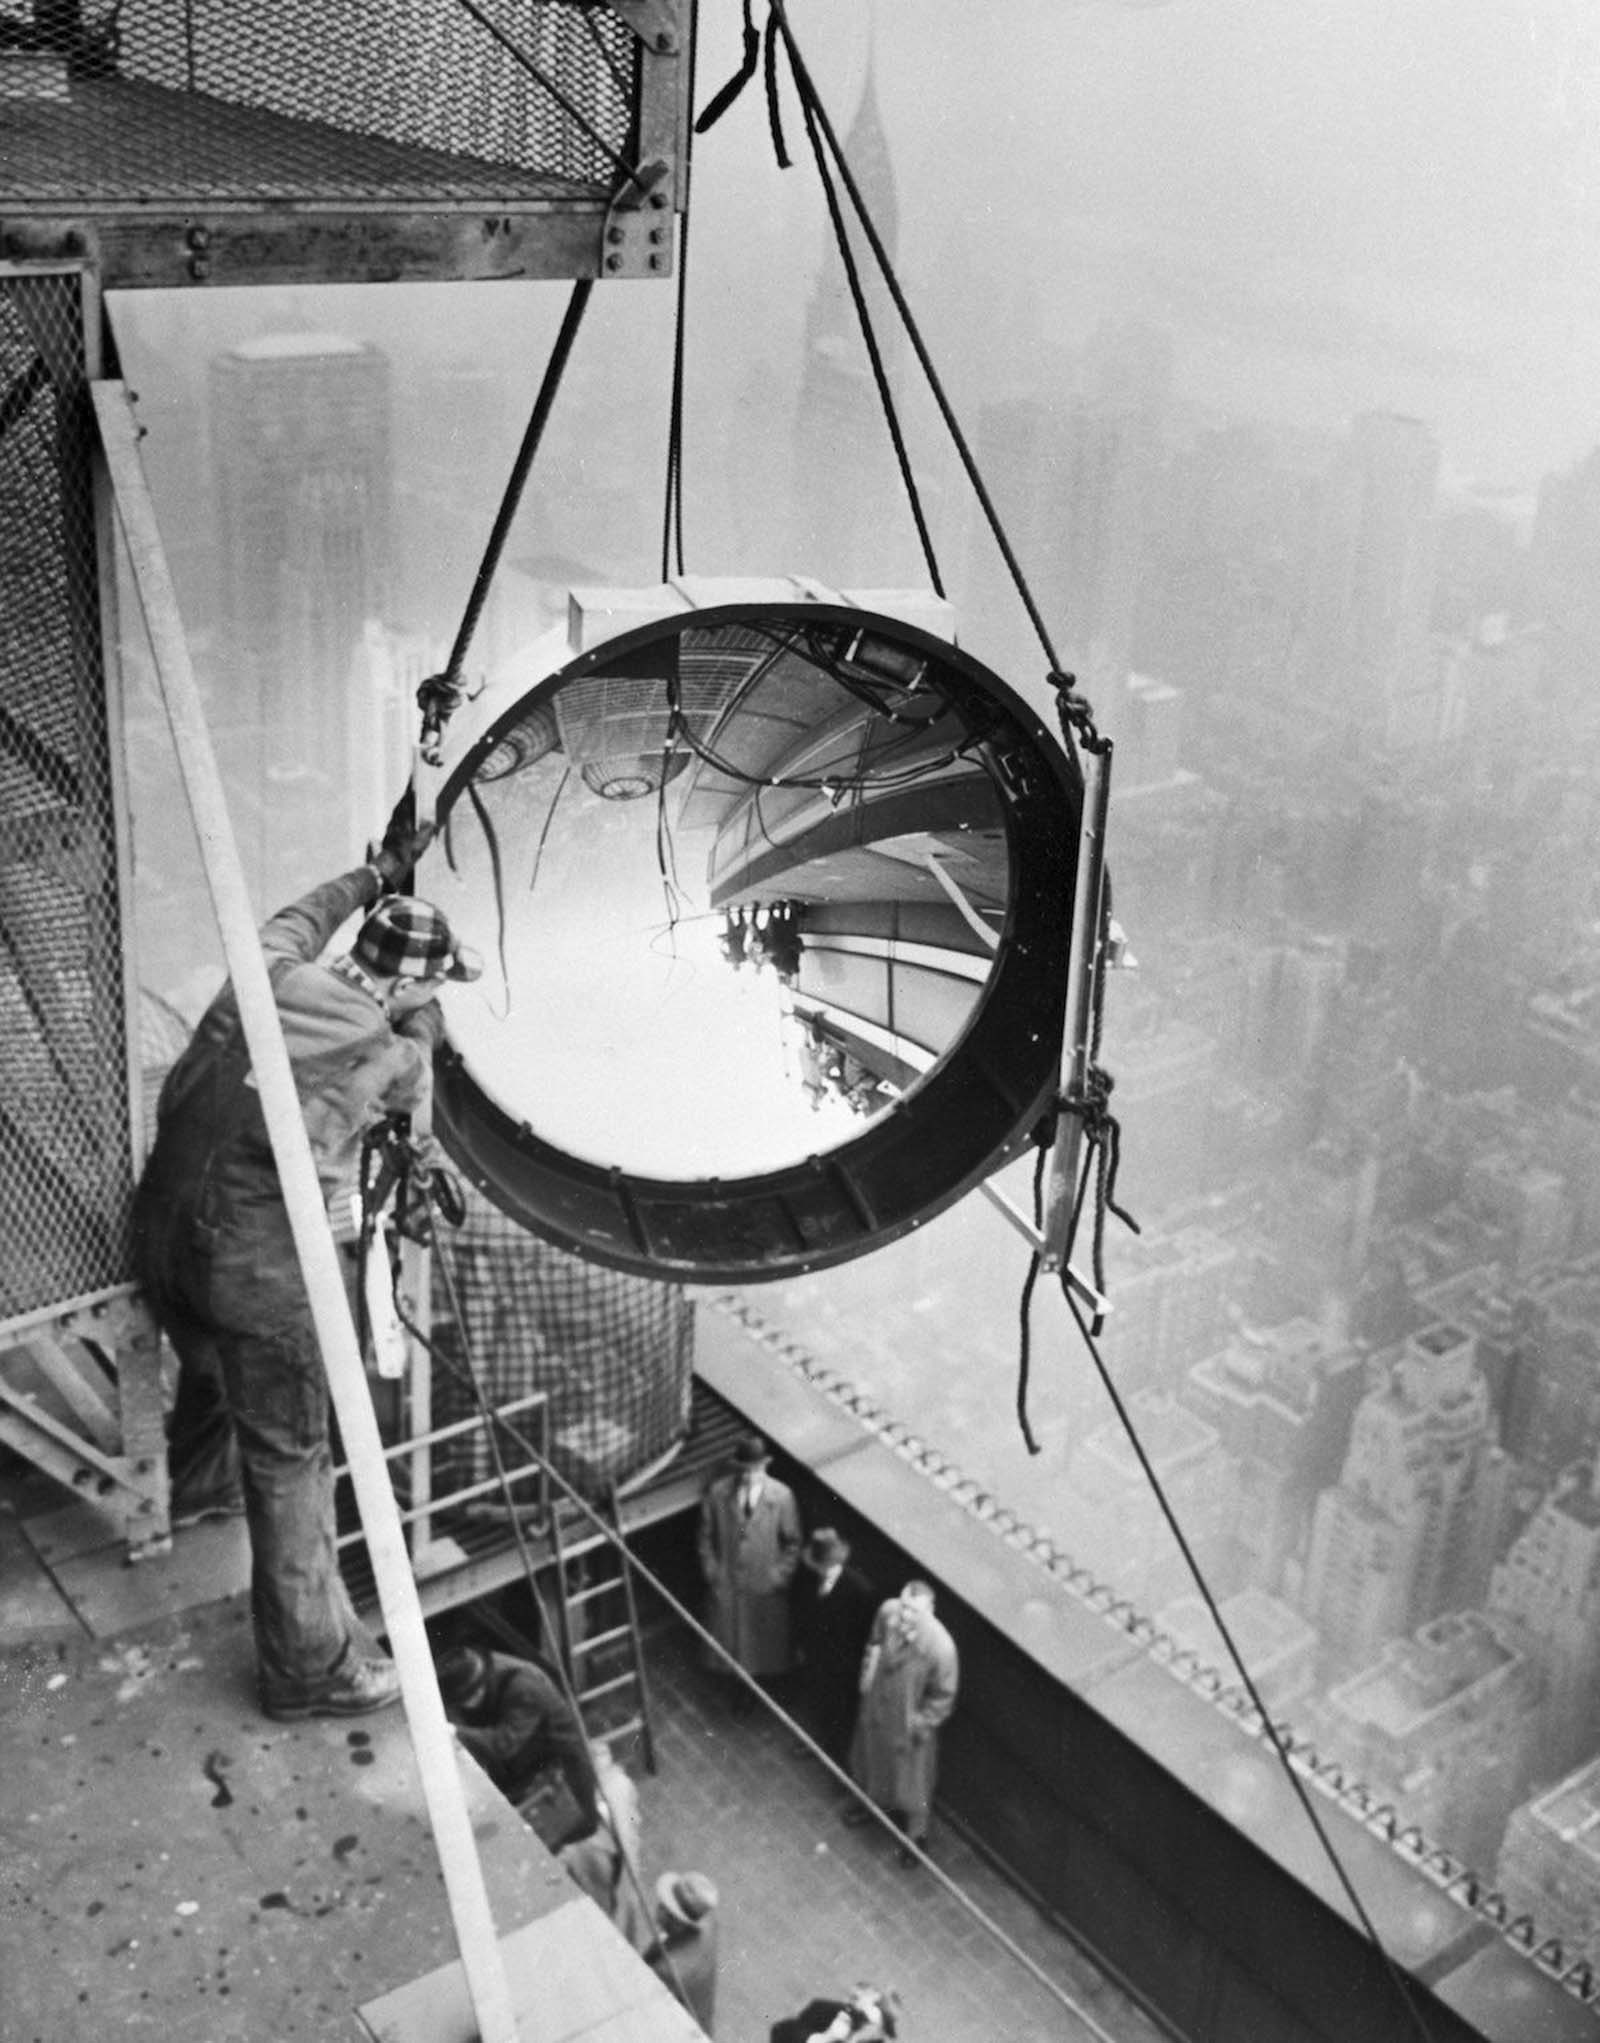 New uniforms for Empire State Building workers take cue from the